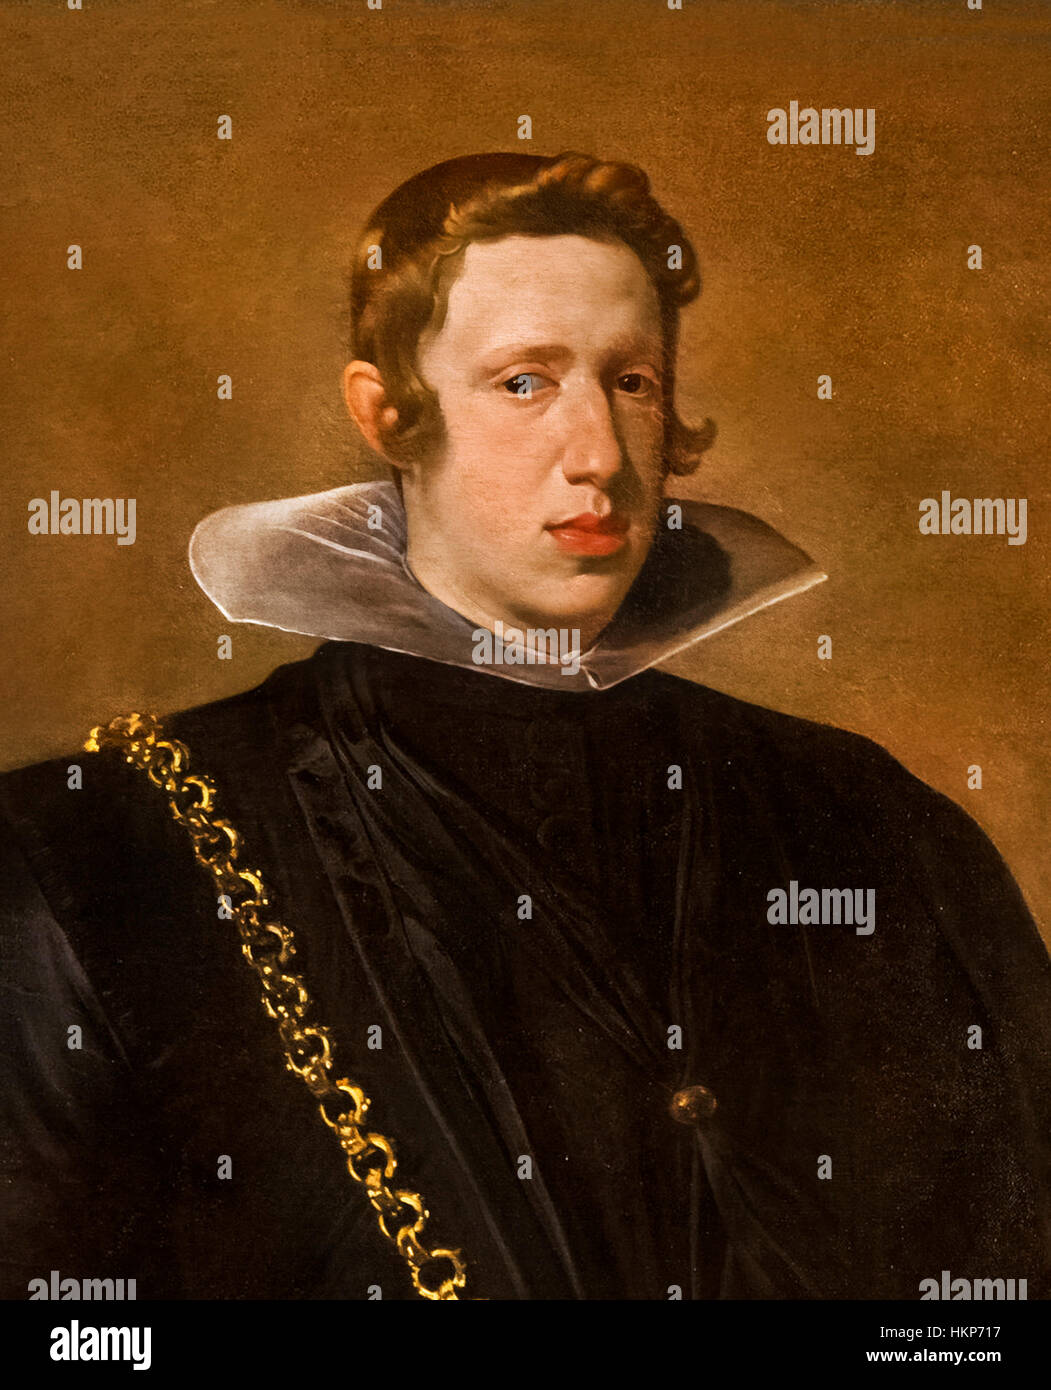 Philip IV of Spain. Portrait of King Philip IV by Velazquez, oil on canvas, c.1624 Stock Photo